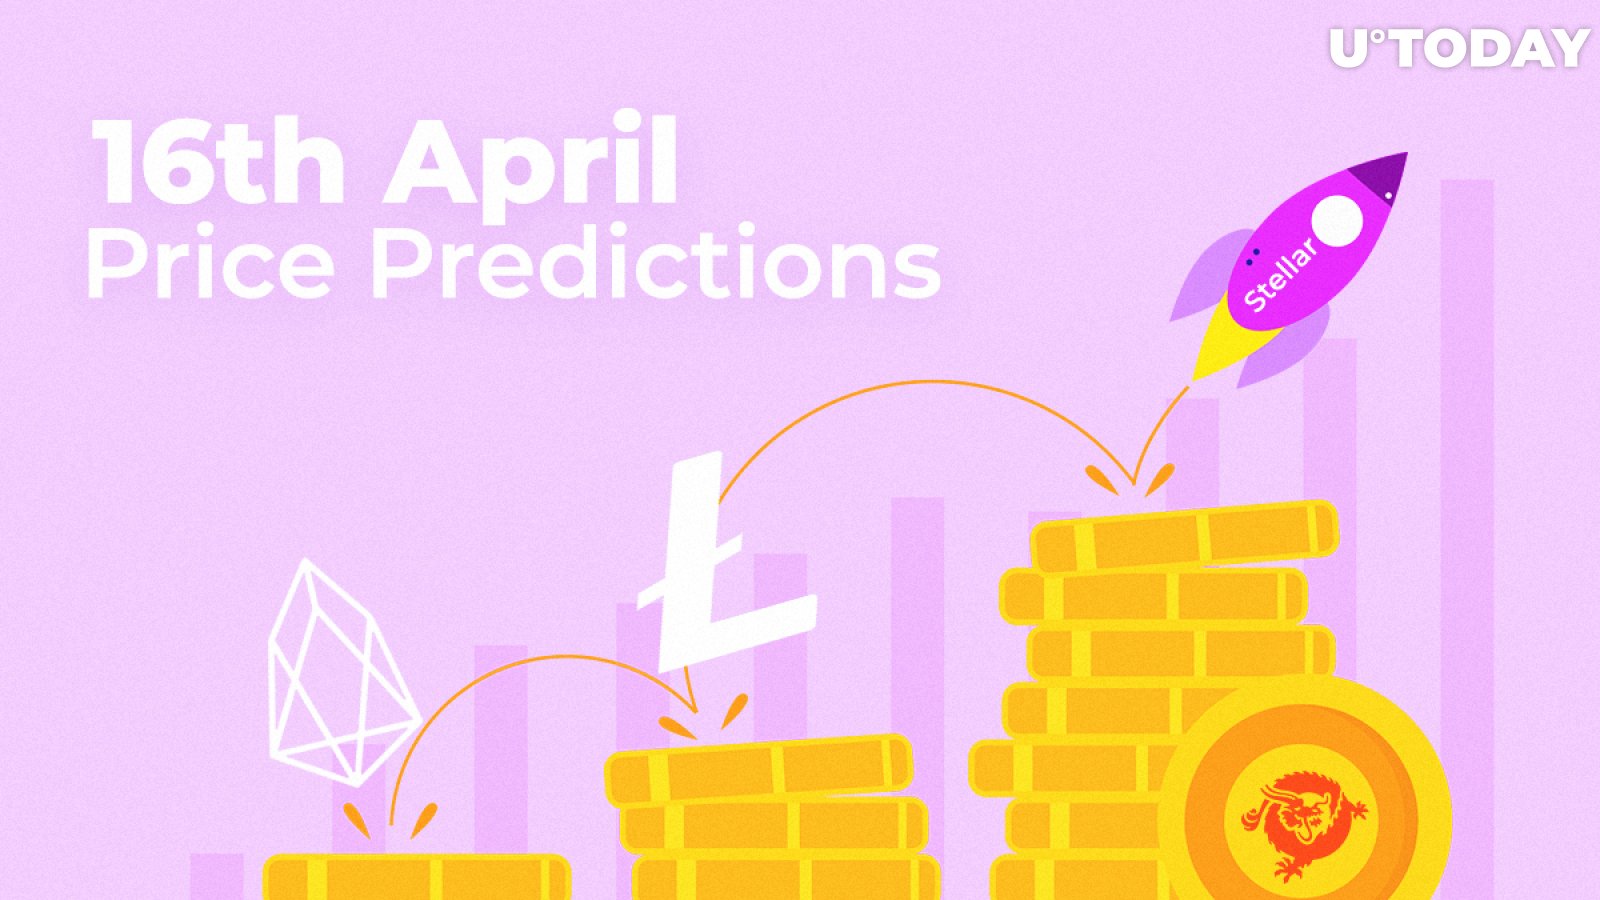 16th April Price Predictions: Bitcoin SV (BSV), Litecoin (LTC), Stellar (XLM), EOS — Following the General Market Correction or Its Own Decline Patterns?